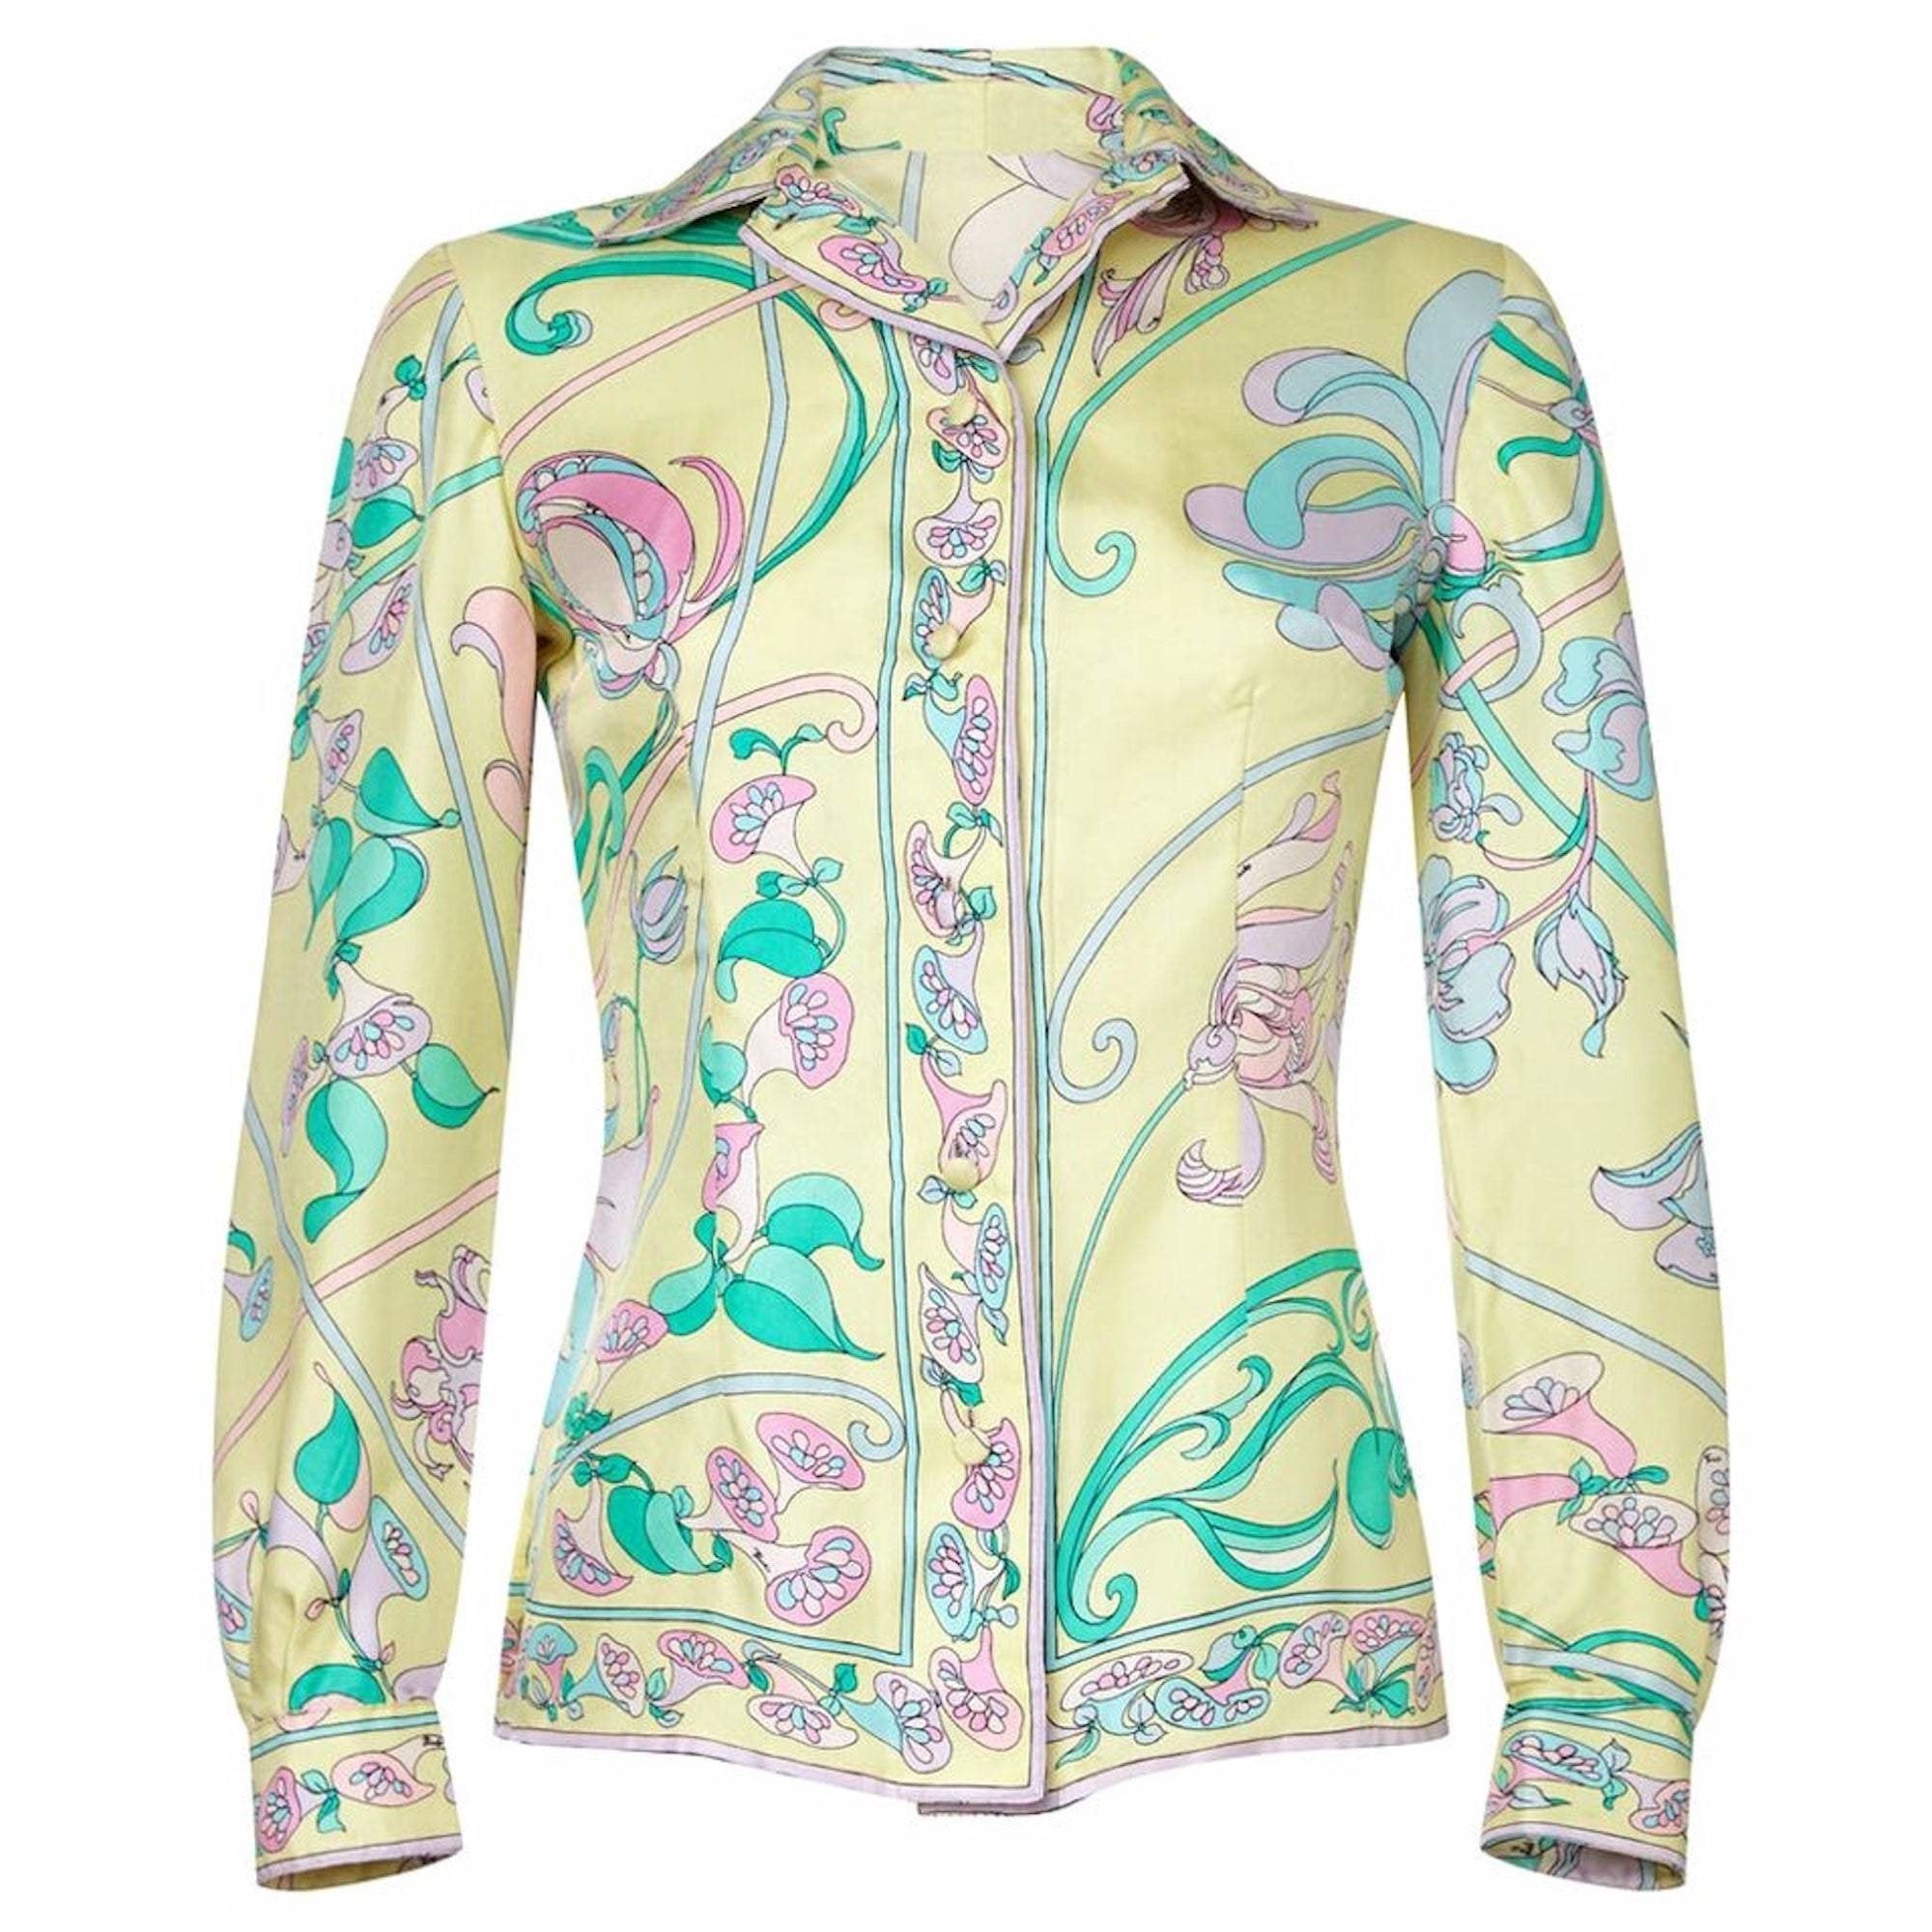 Emilio Pucci 1960s Pale Yellow Silk Blouse With Floral Design